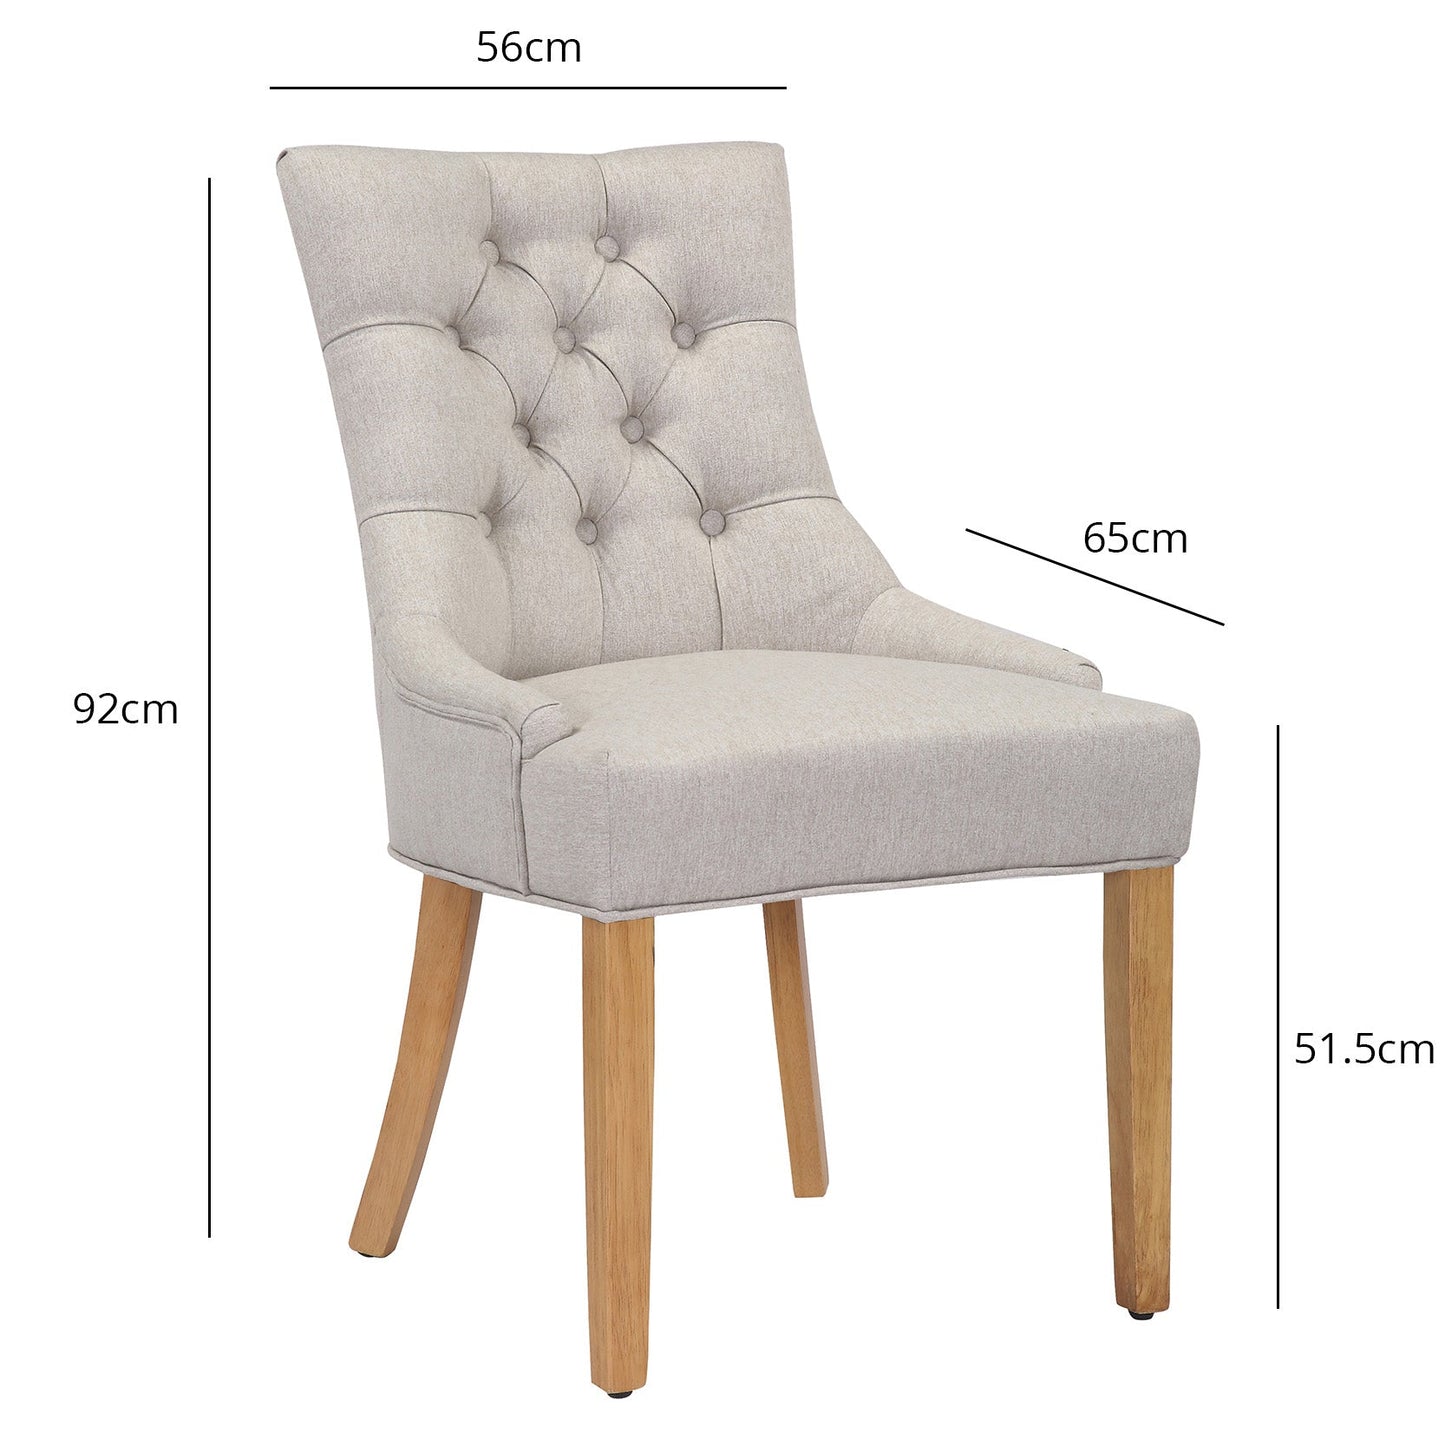 Louis dining chairs - oatmeal and light wood - Laura James